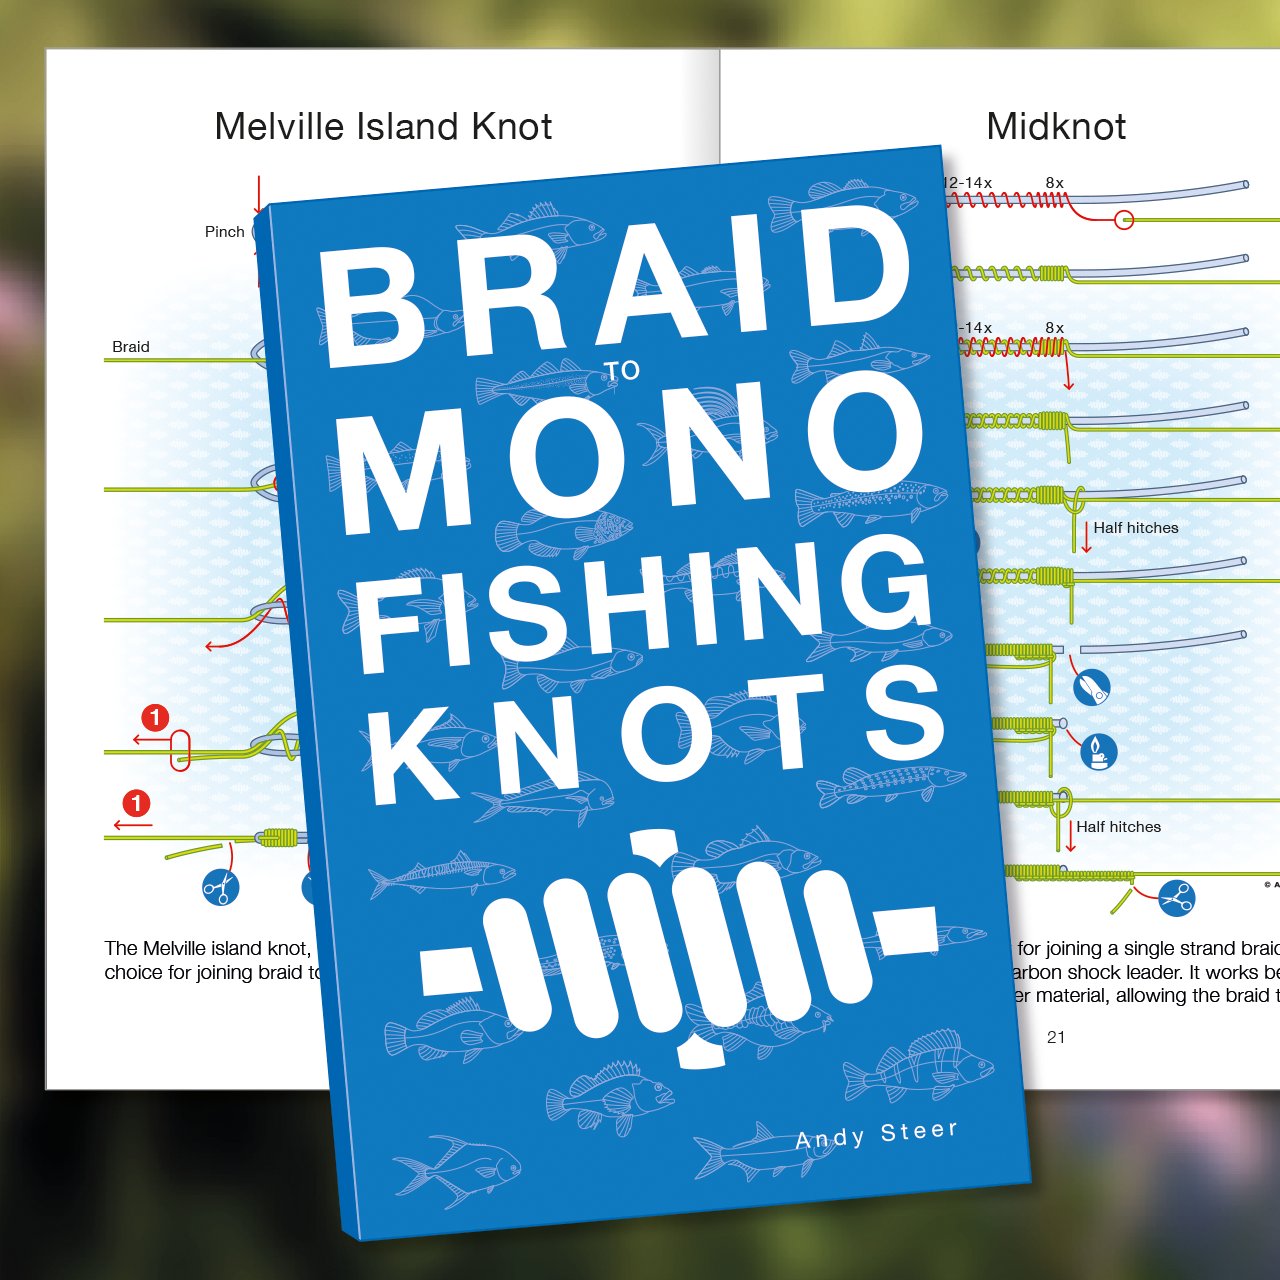 Andy Steer on X: The NEW book Braid to Mono Fishing Knots